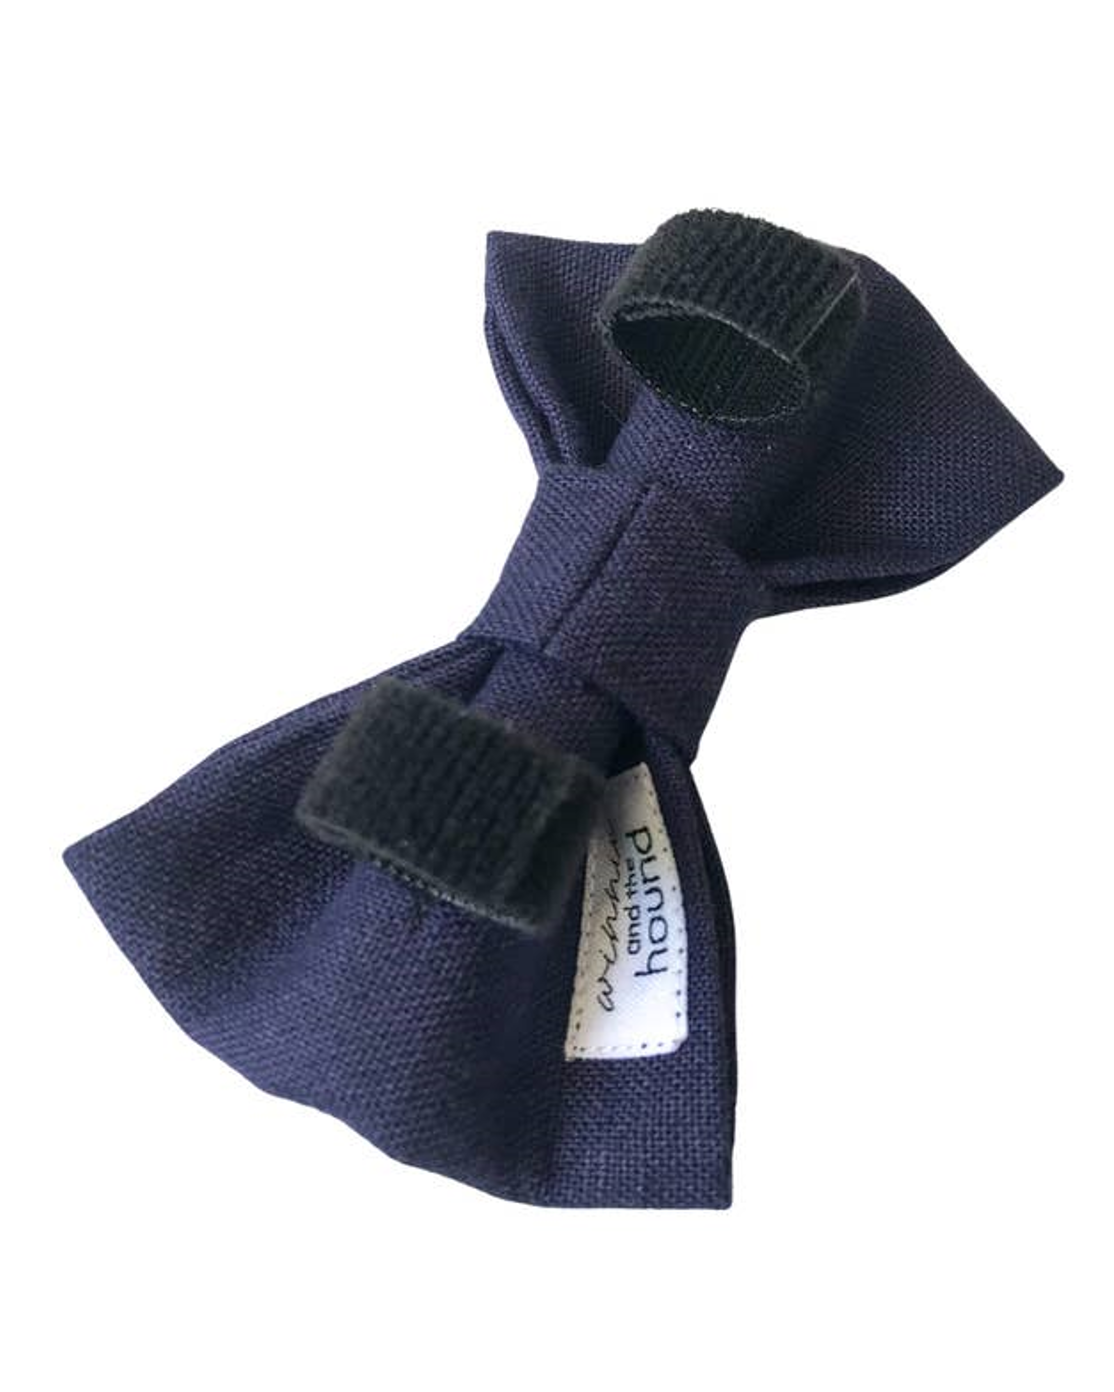 Take a Bow Navy Linen Bow Tie